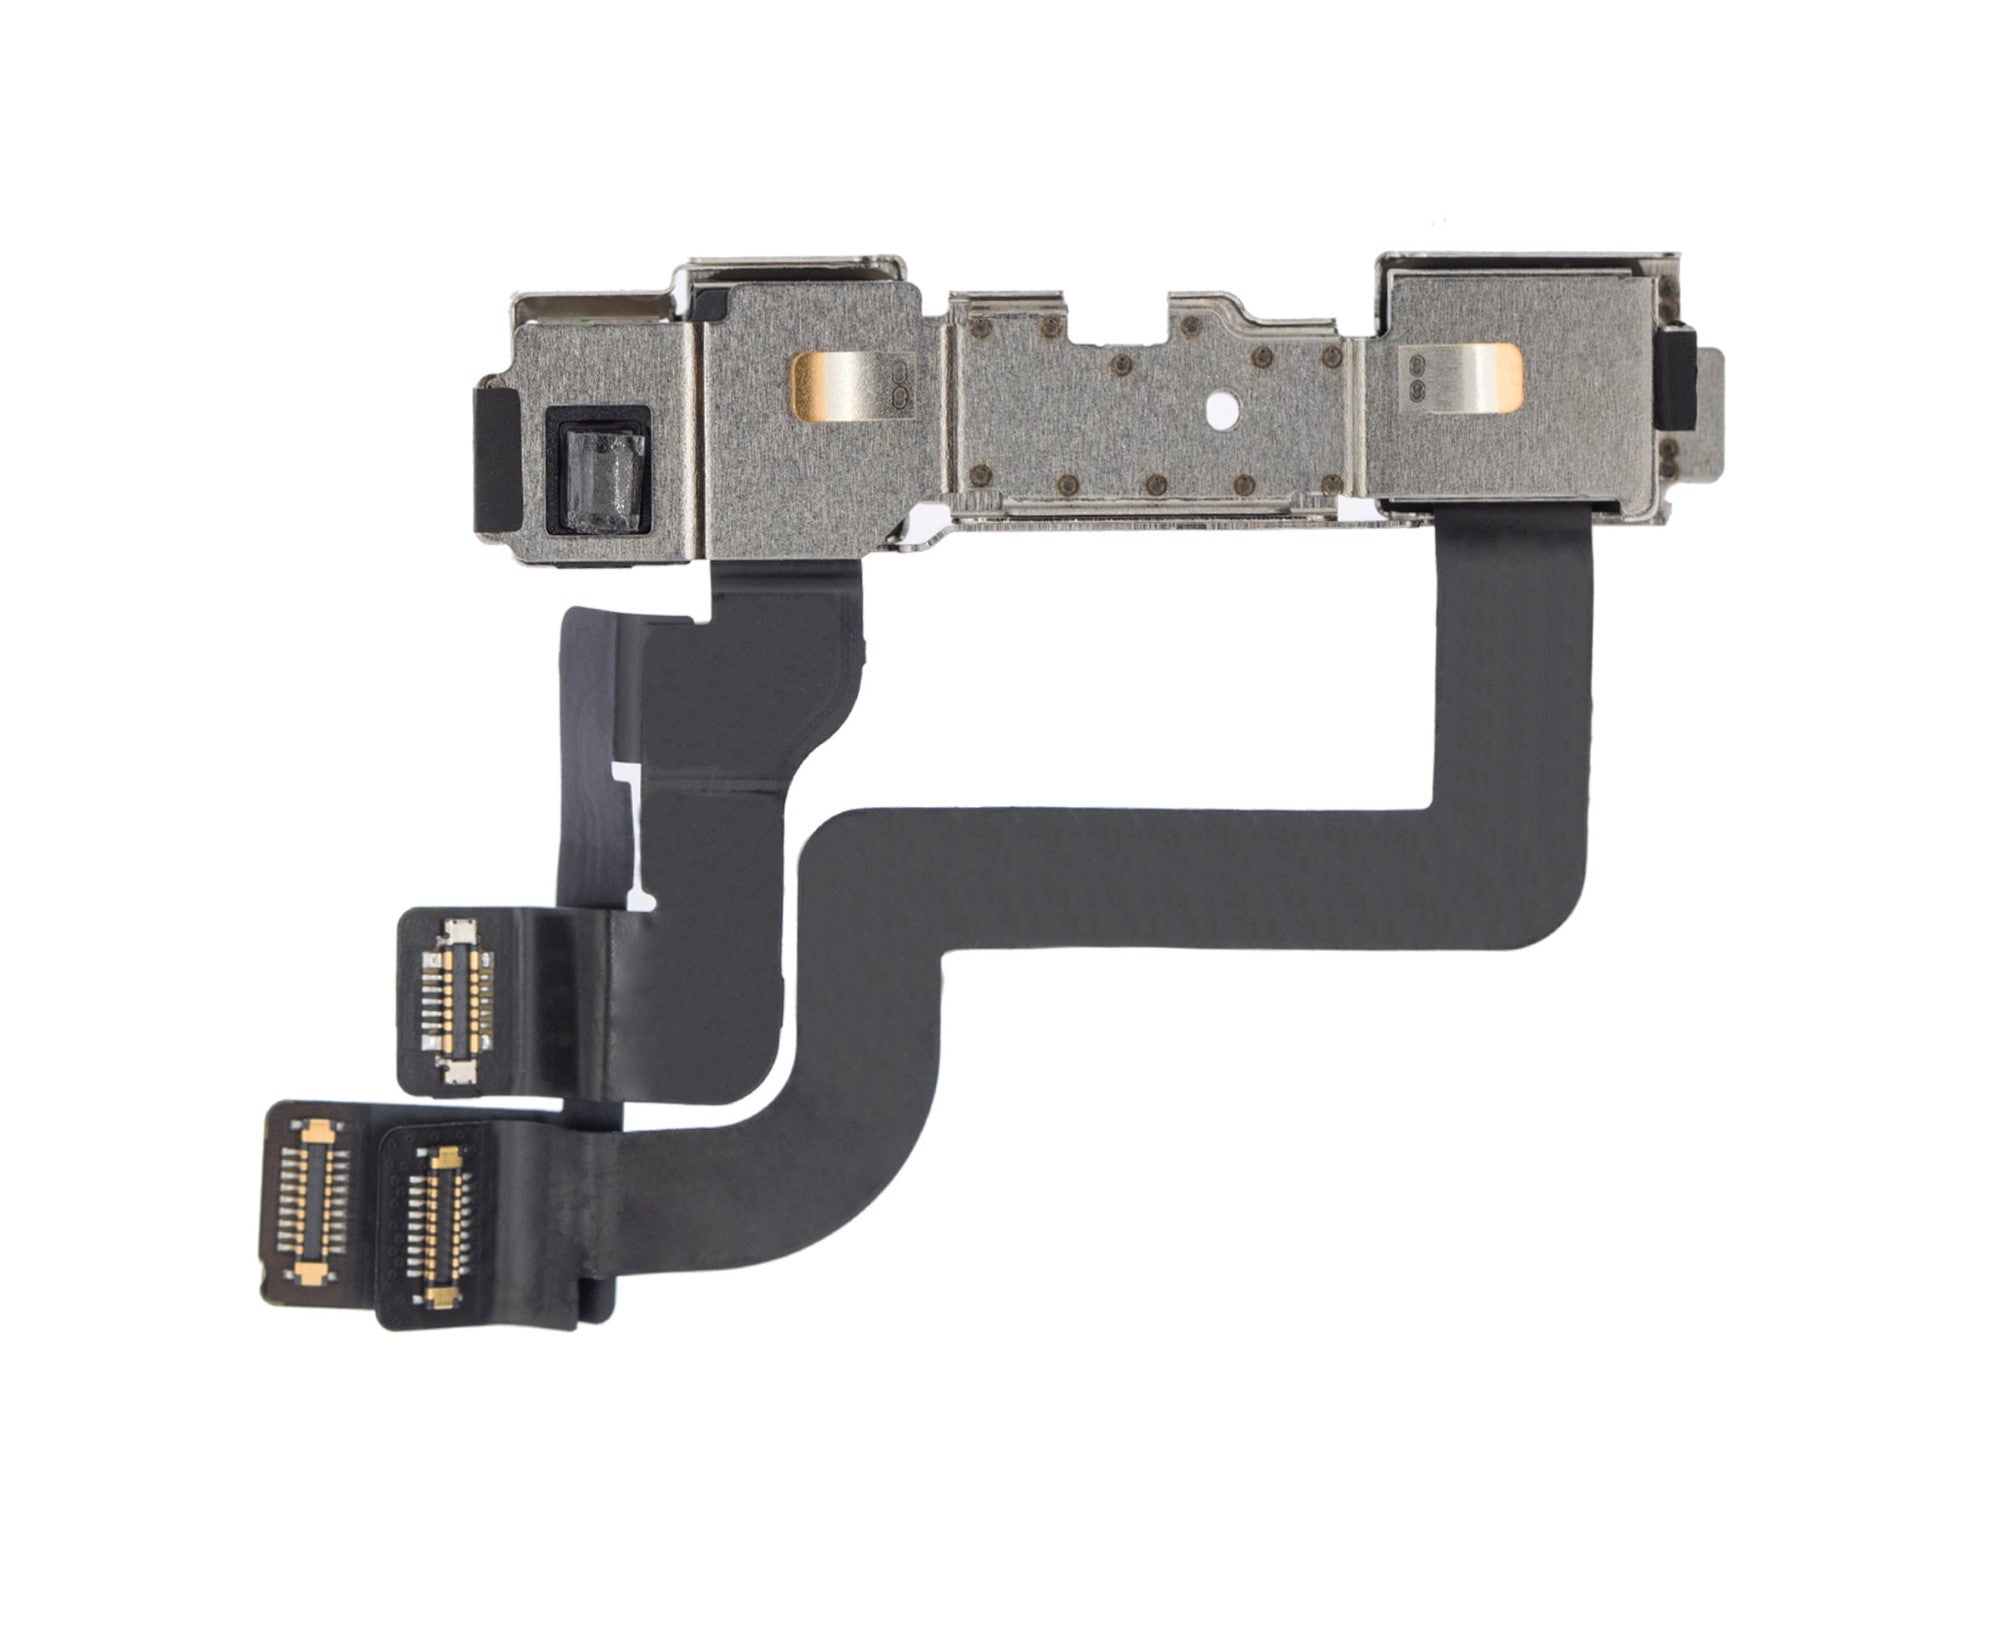 Replacement Front Camera With Sensor flex Cable for iPhone XR (Original Pulled)